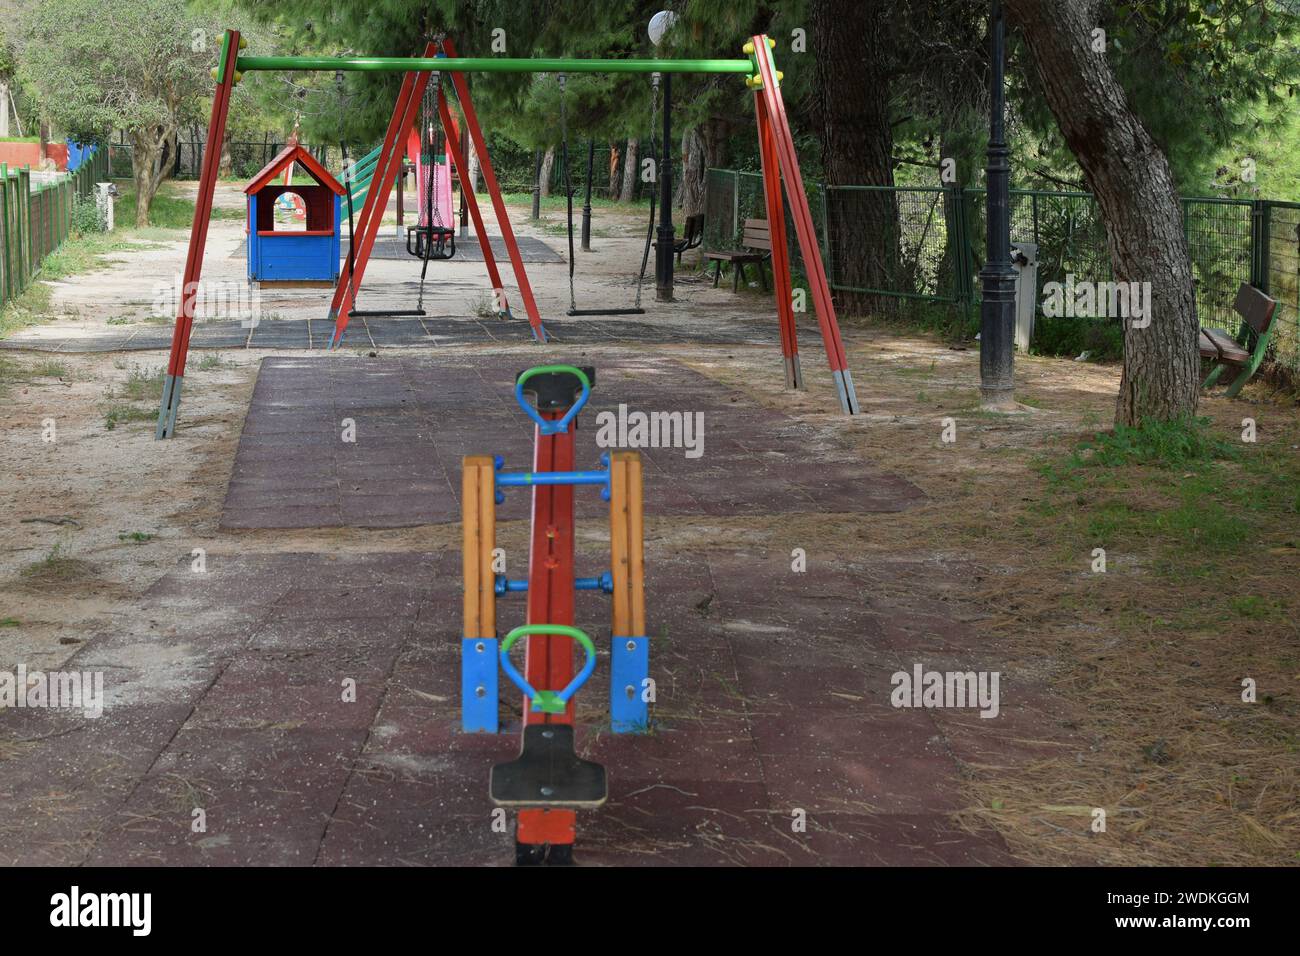 Swings and sitting benches in public playground park. Stock Photo